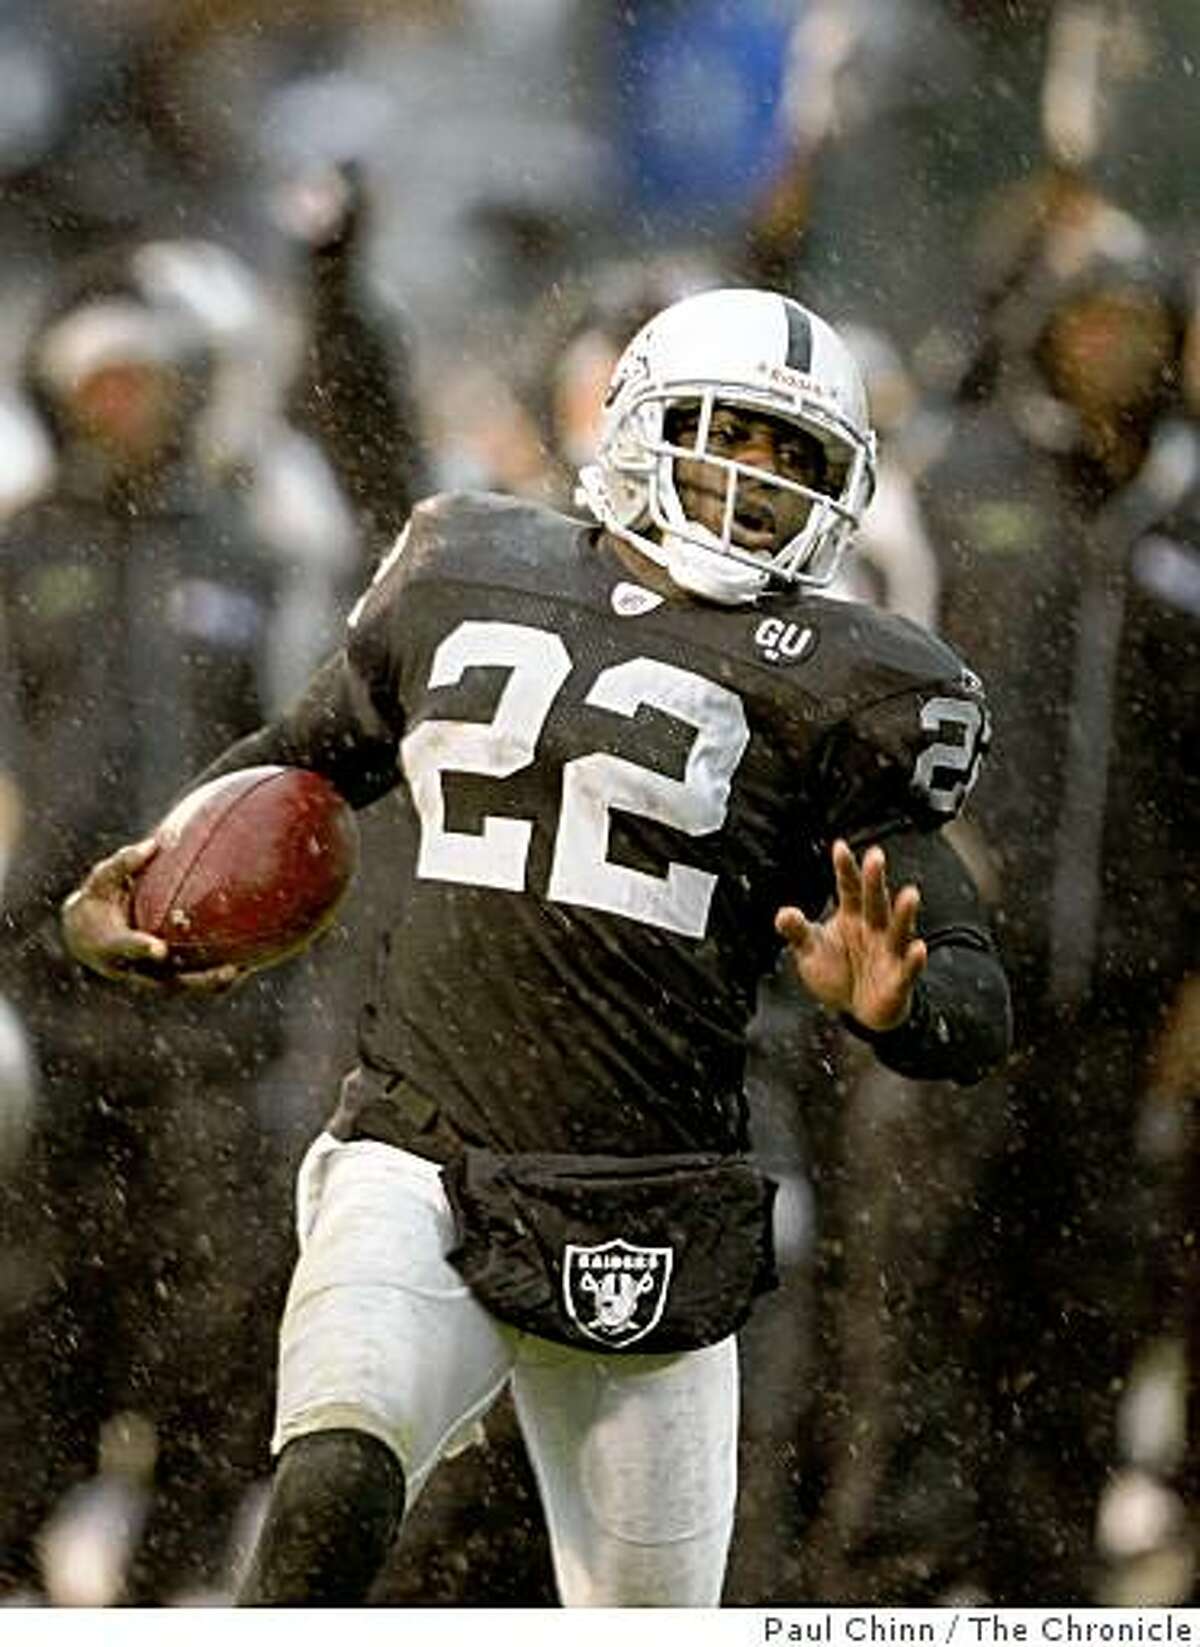 Justin Miller heads for the end zone on his 91-yard kickoff return in the second quarter of the Oakland Raiders vs. New England Patriots NFL football game in Oakland, Calif., on Sunday, Dec. 14, 2008.